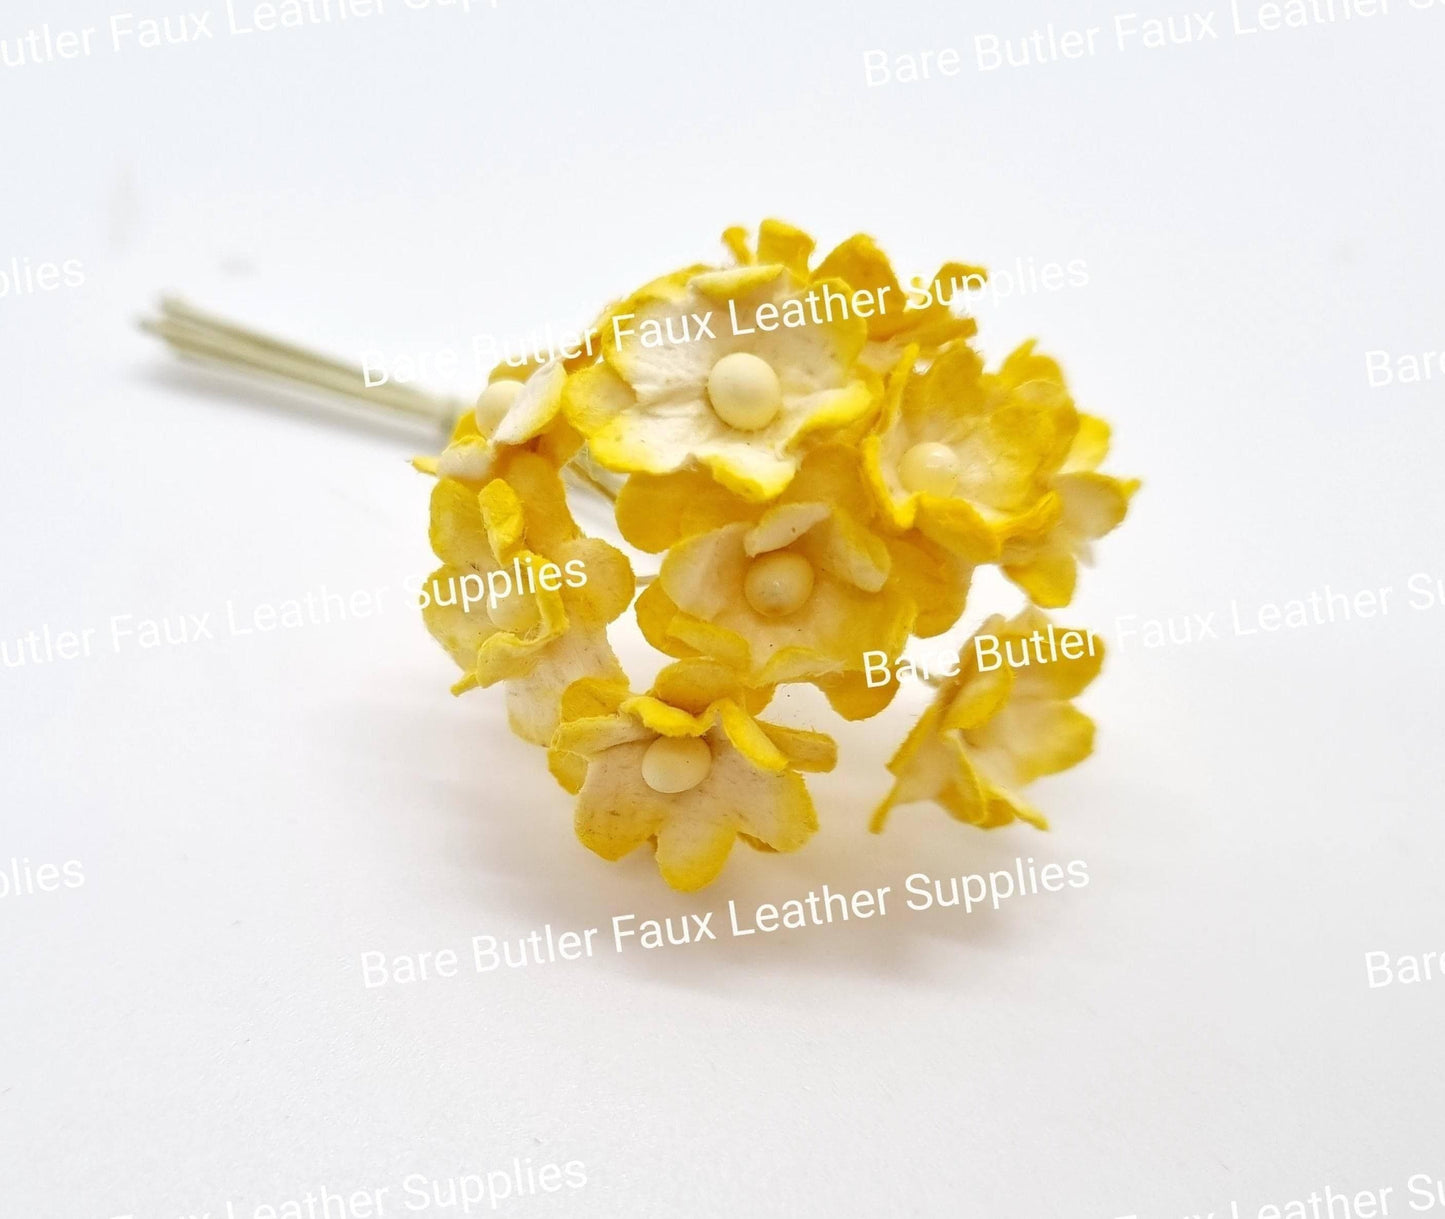 Hydrangea Yellow 10 Pack - Embelishment, Flower, hydrangea, Mulburry, Yellow - Bare Butler Faux Leather Supplies 